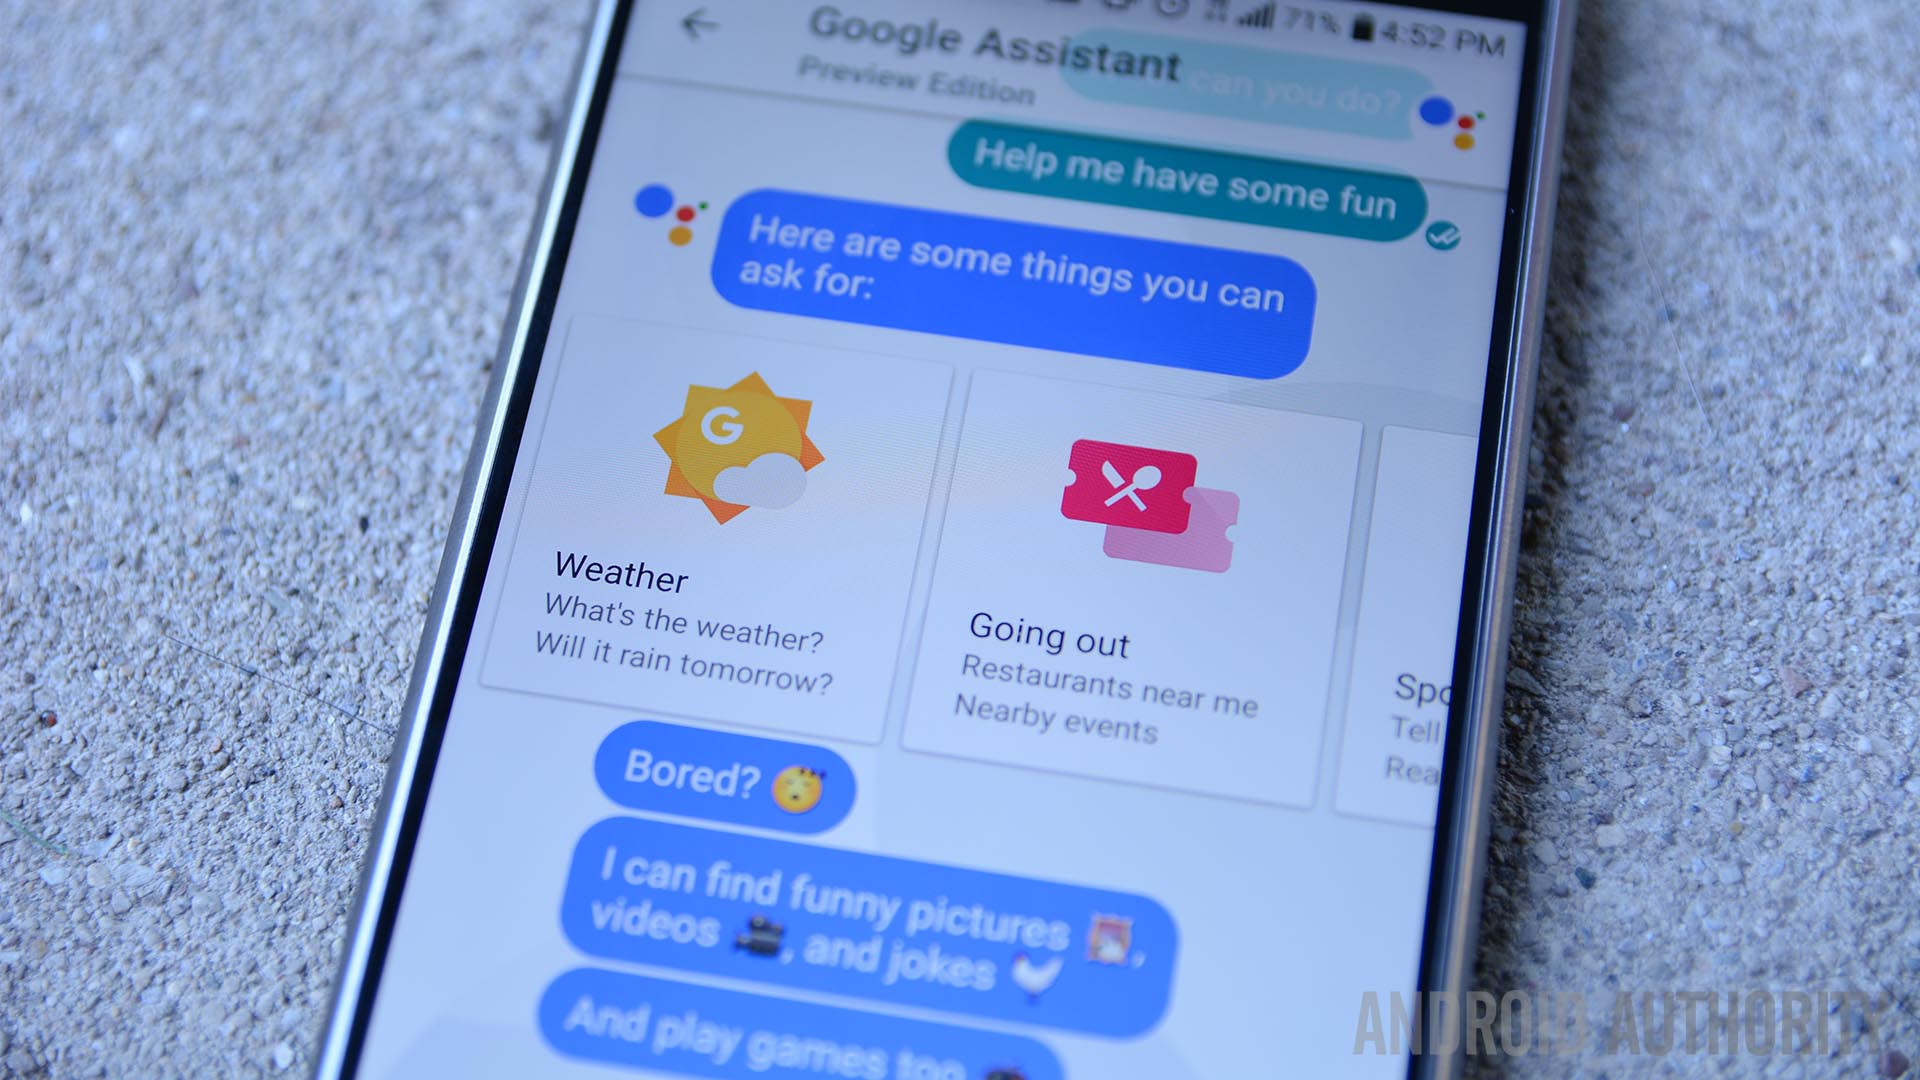 Google Assistant in the Allo chat app